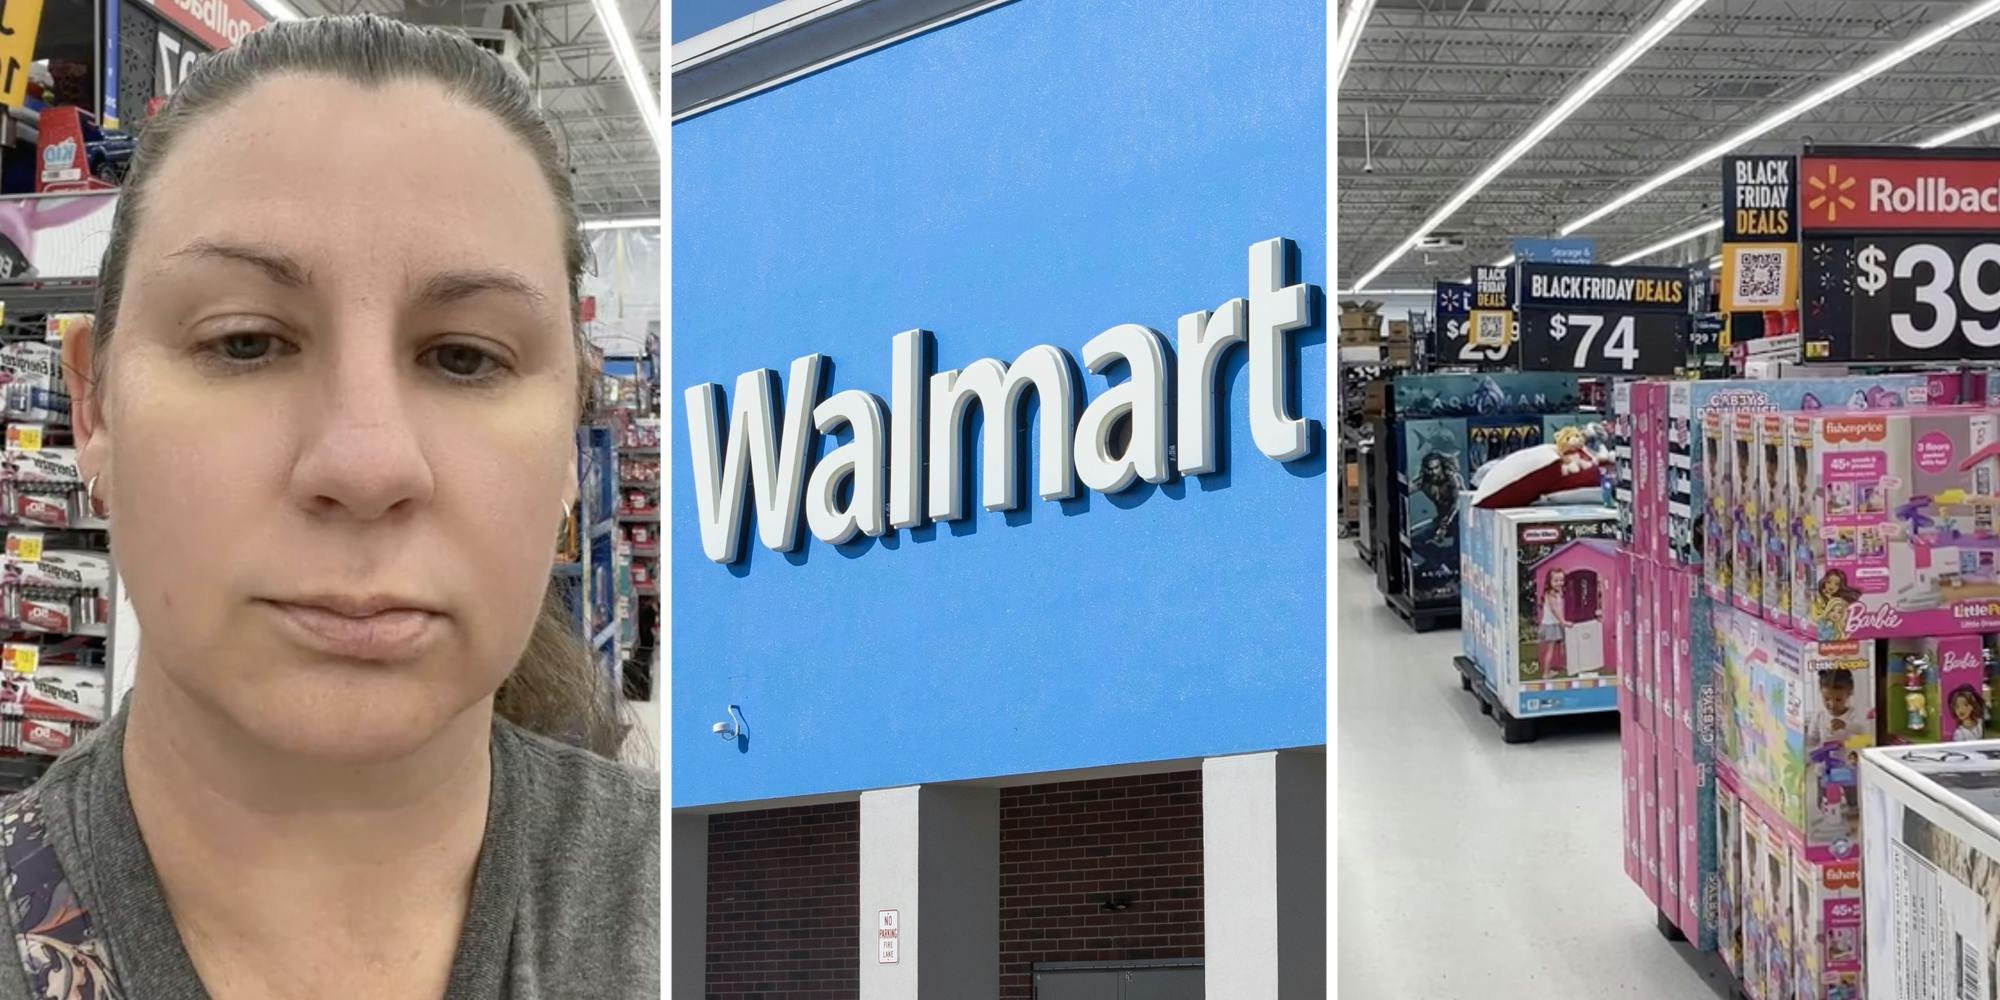 ‘That makes me strangely happy’: Walmart shopper shows all the ‘leftover’ stuff still in store after the deals end